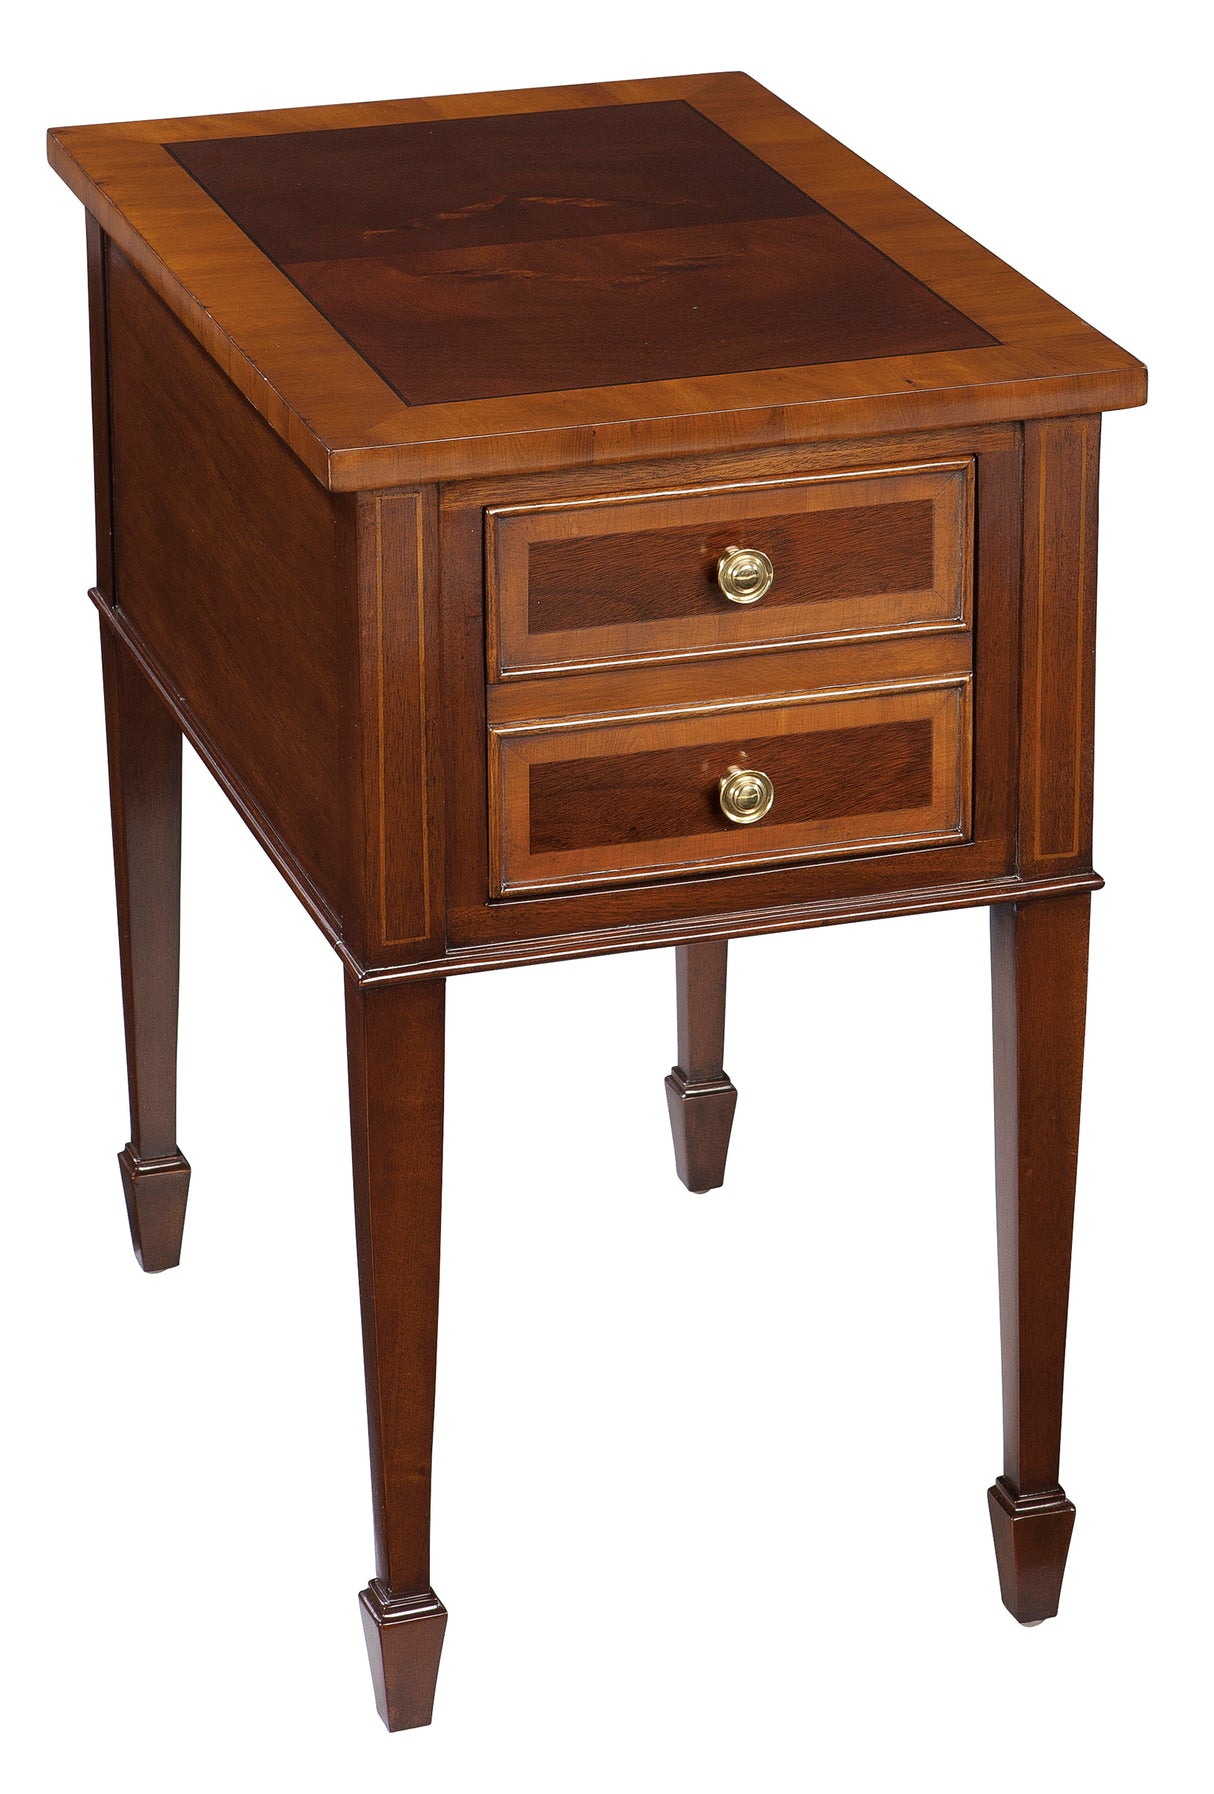 Hekman 22504 Copley Place 15in. x 22in. x 25in. End Table